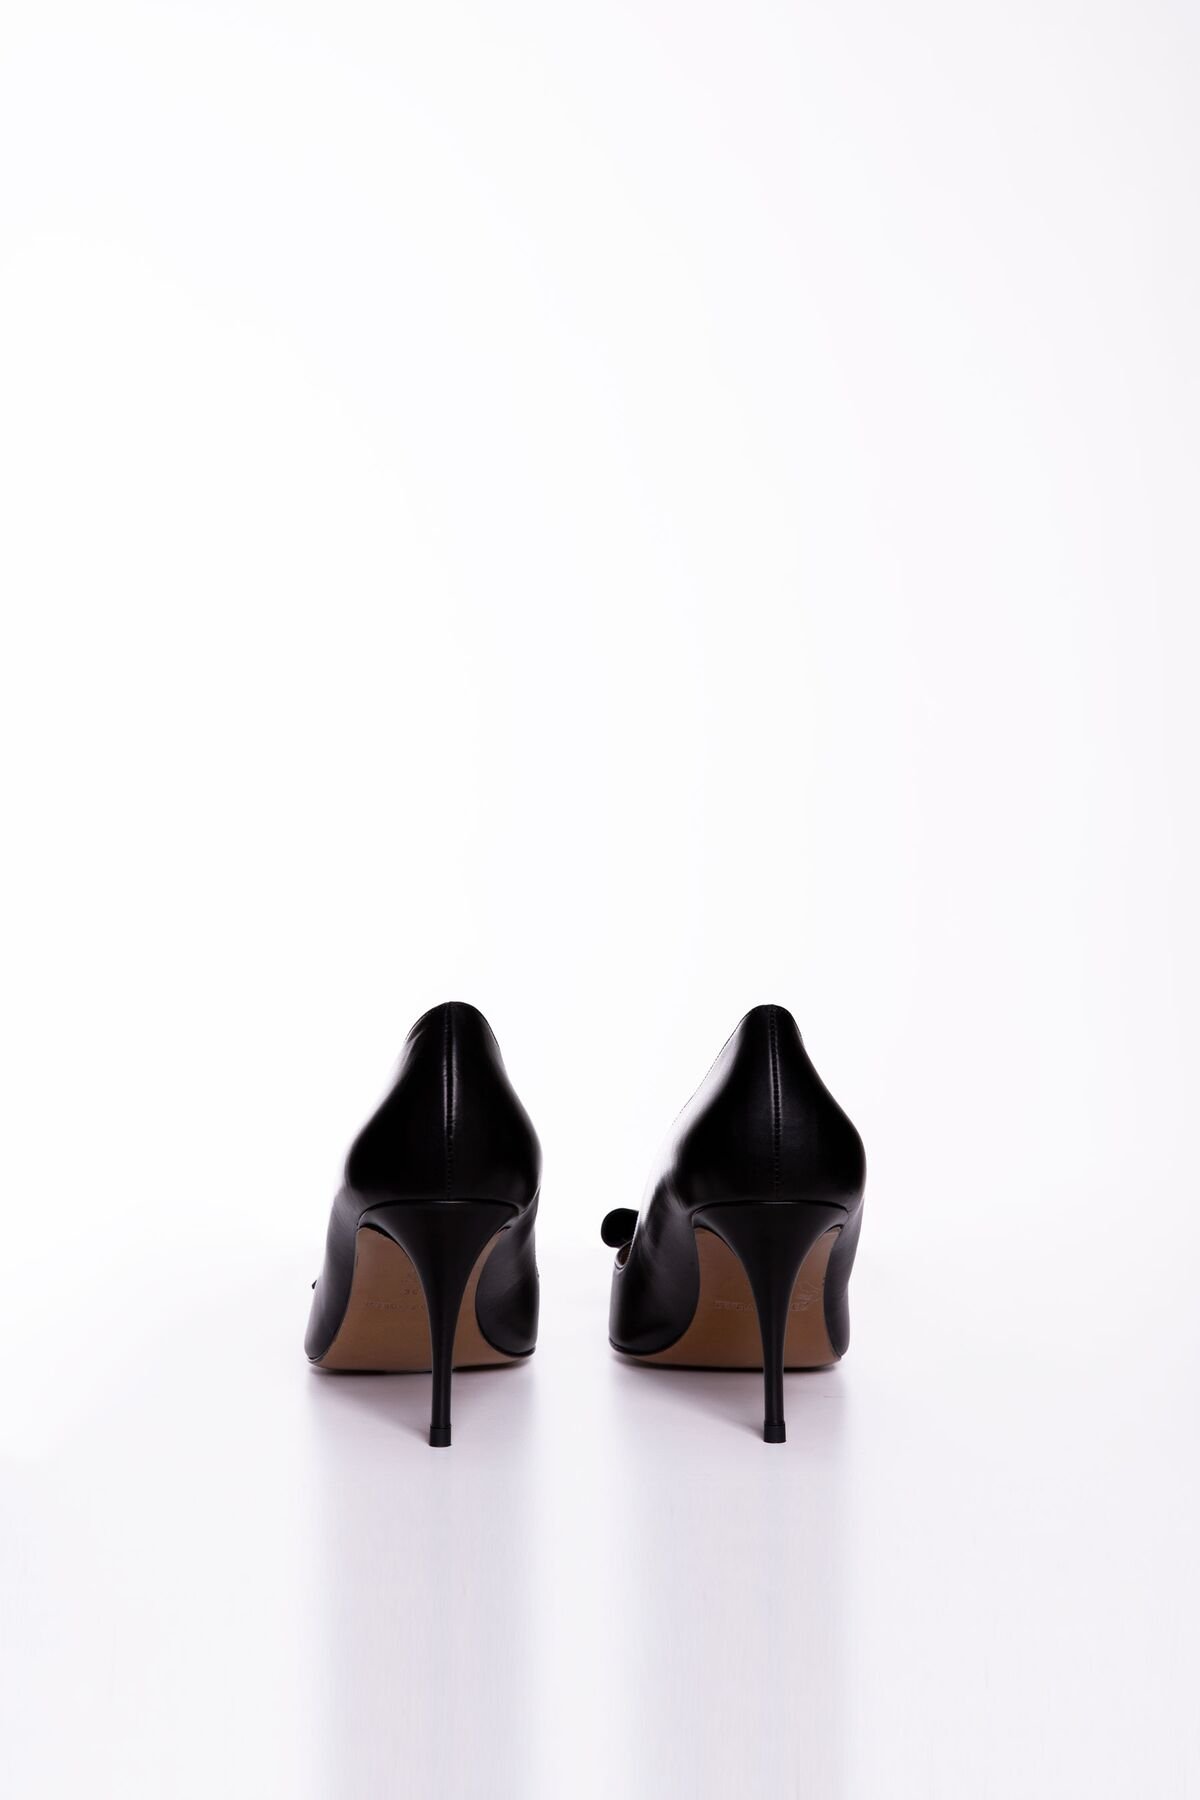 Bow Detailed Black Leather Heeled Shoes